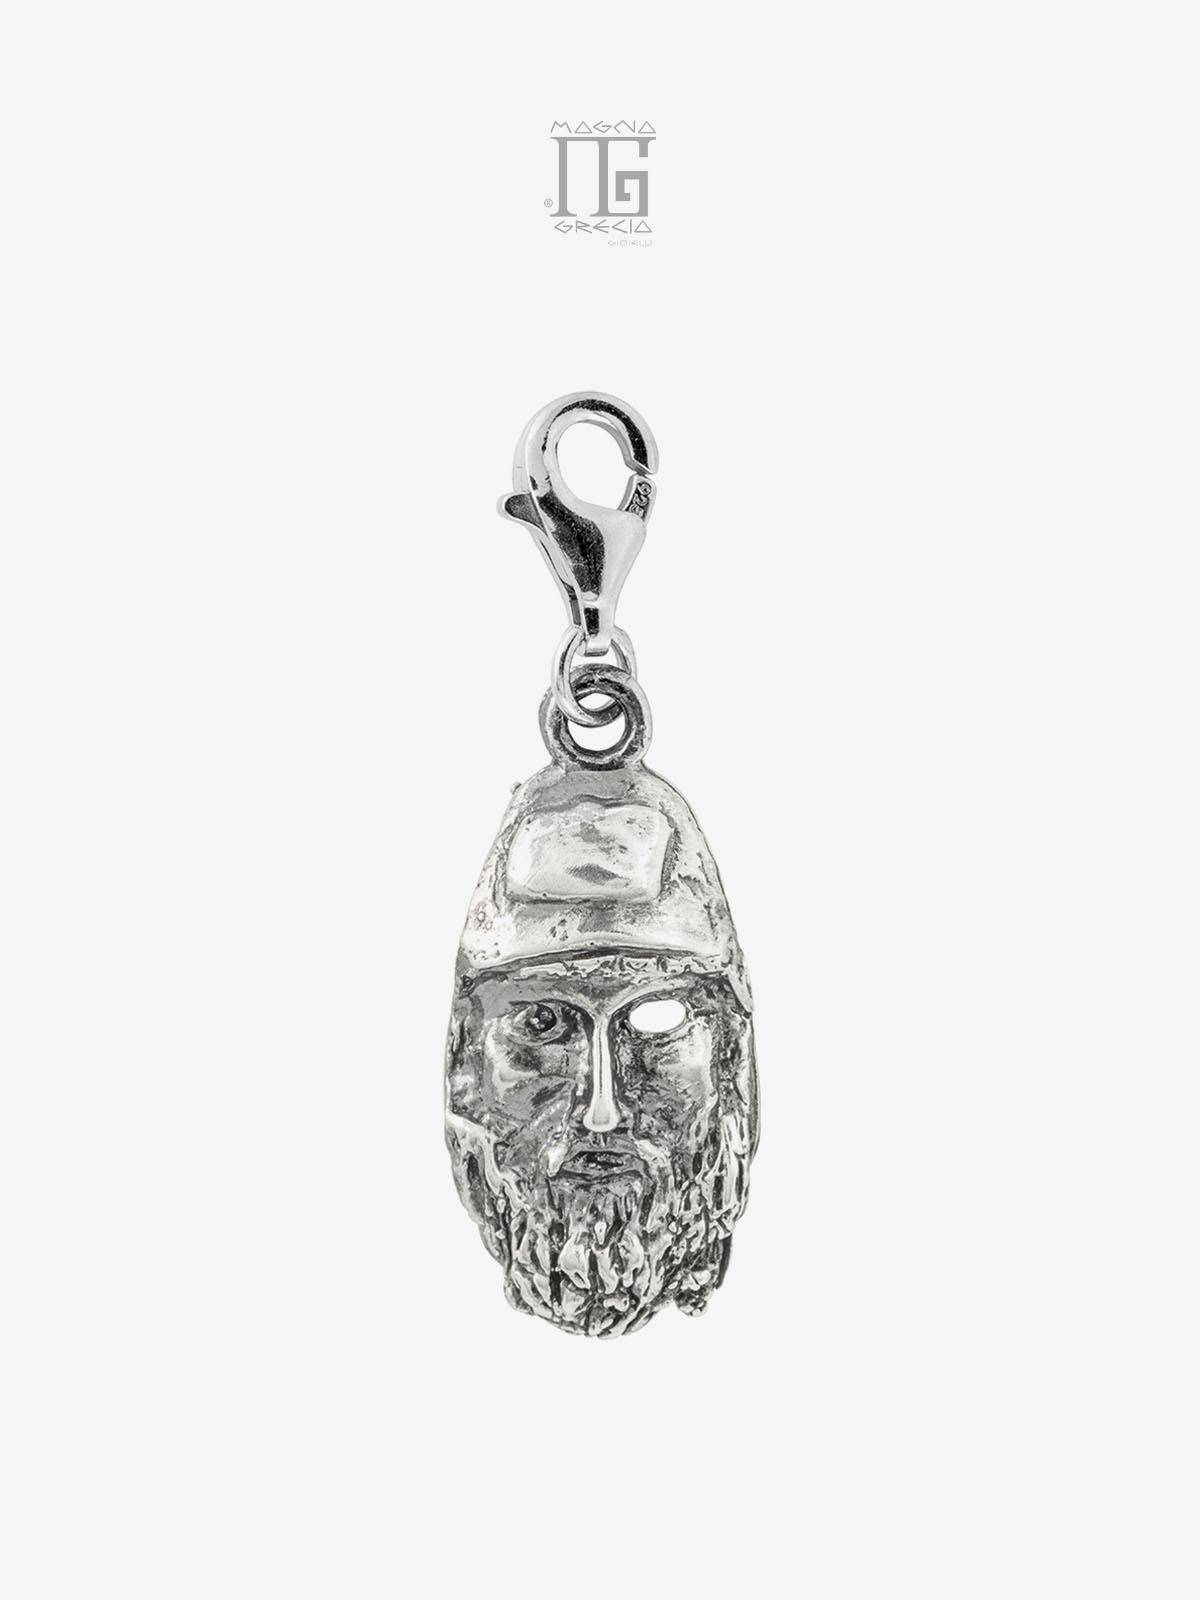 Silver charm depicting the face of the Riace Bronze B Cod. MGK 3704 V-61